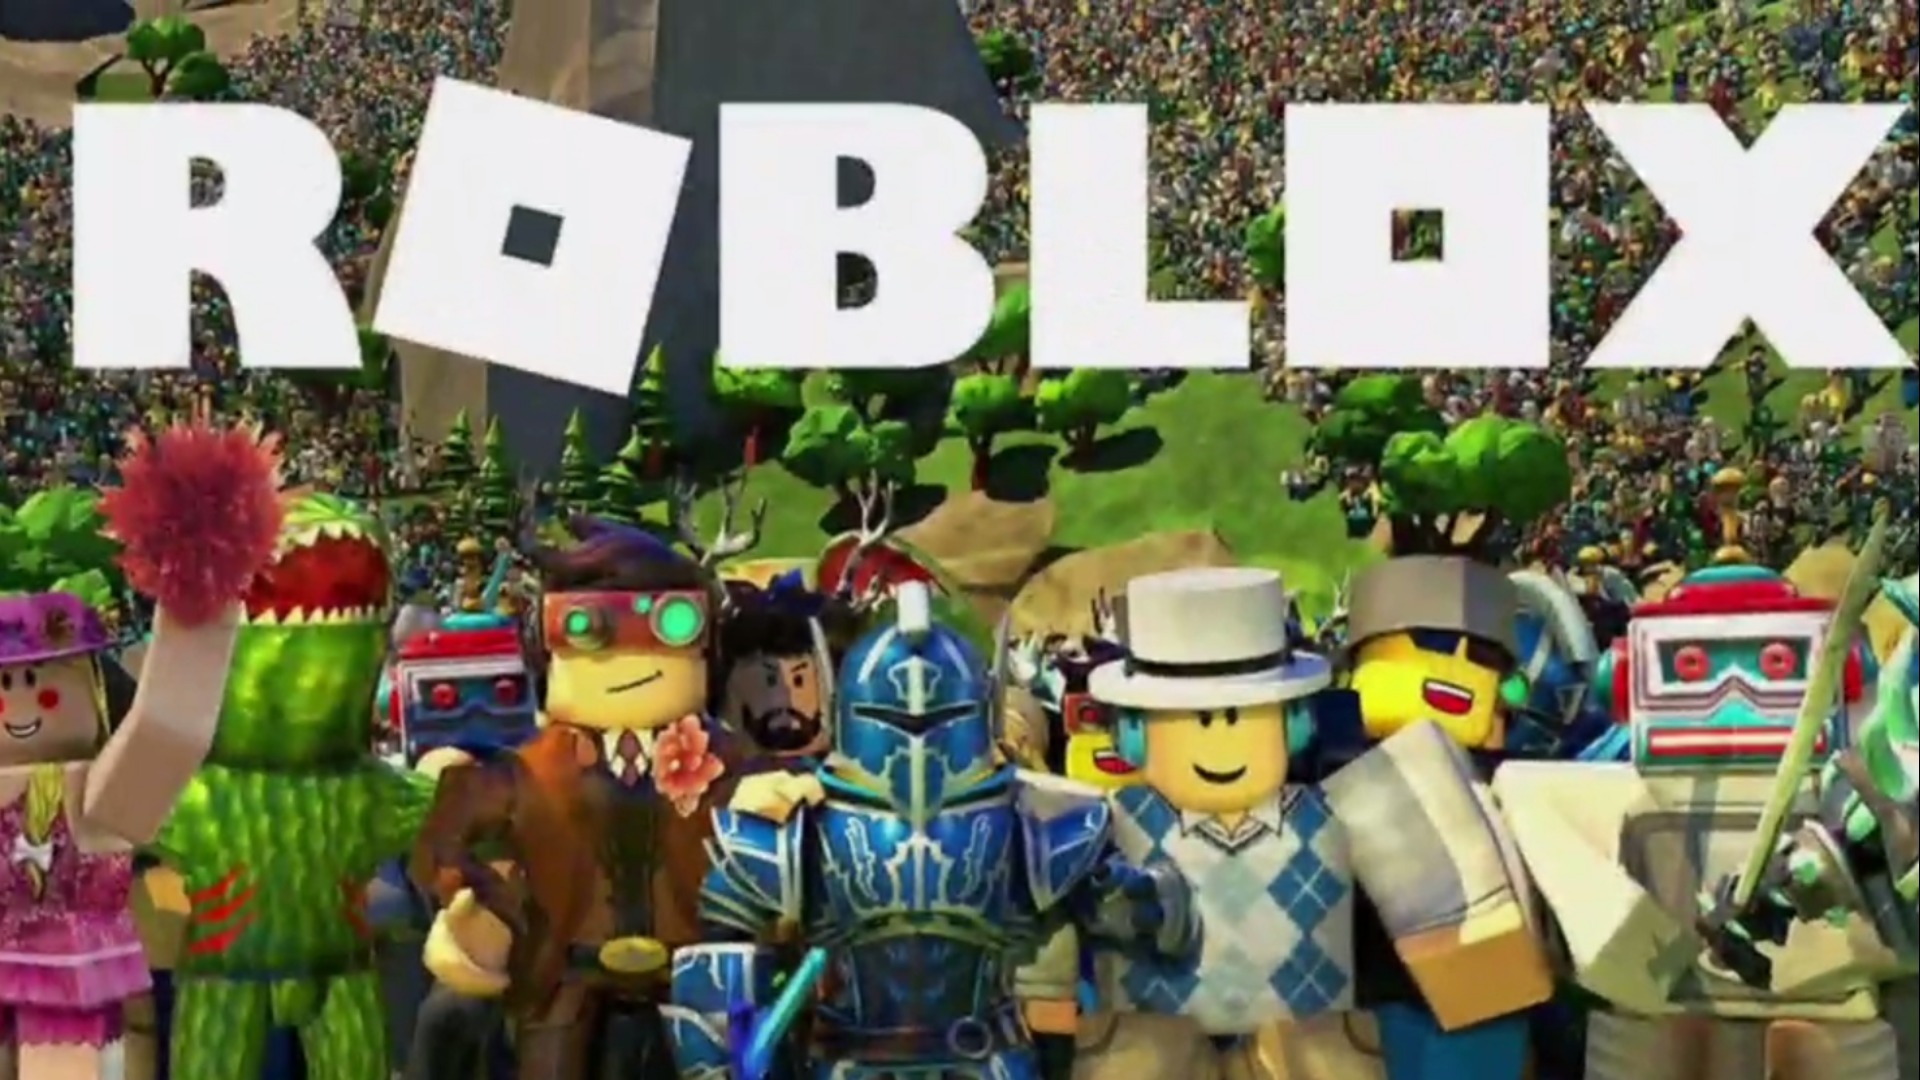 New Questions About Some Inappropriate Content On The Gaming Platform Roblox Video - roblox inappropriate place